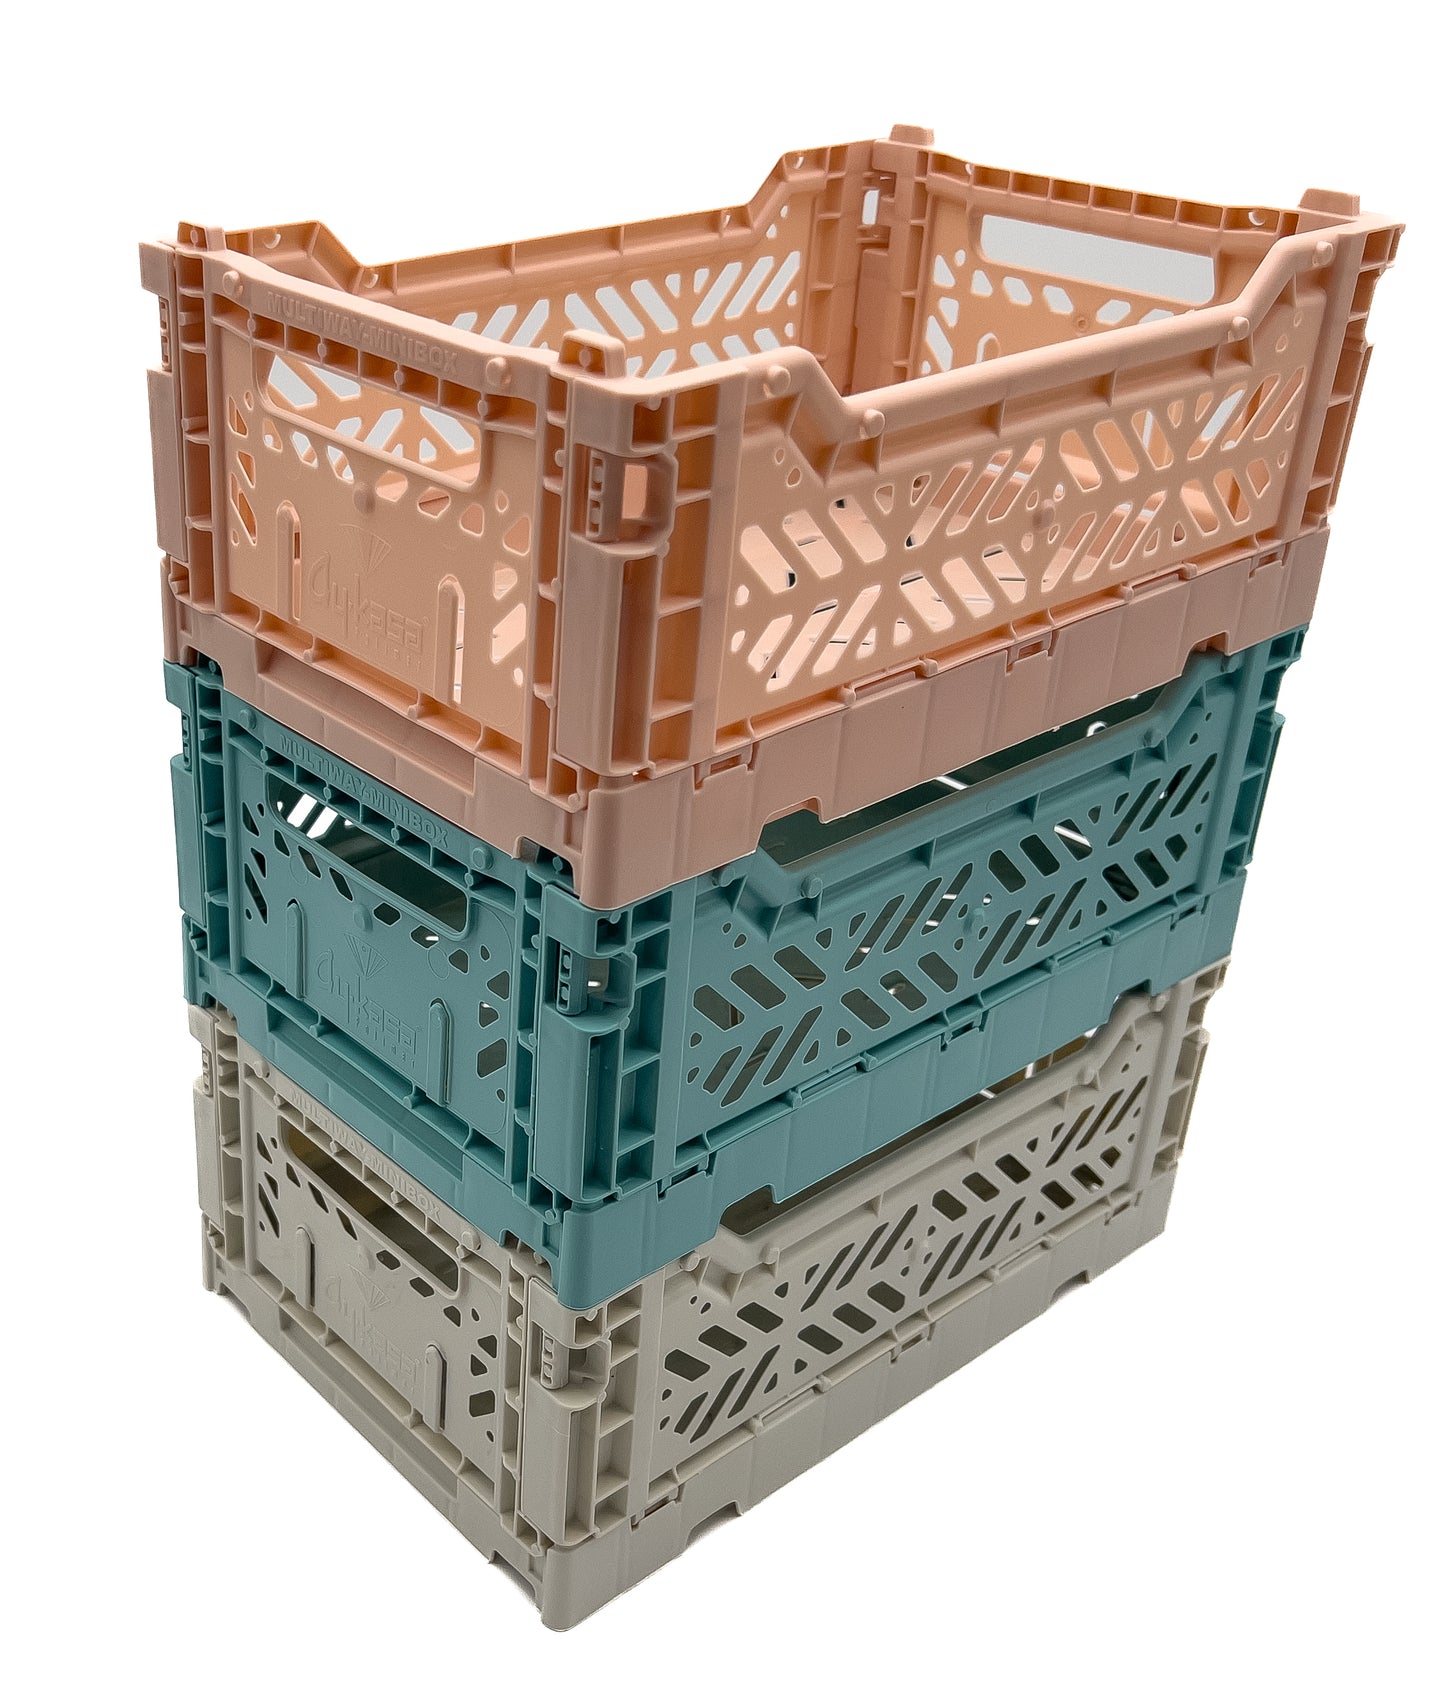 Luna Crates 3-Pack Foldable Storage Bins, Plastic Crate for Storage, Collapsible Crate, Utility Stackable Box Small